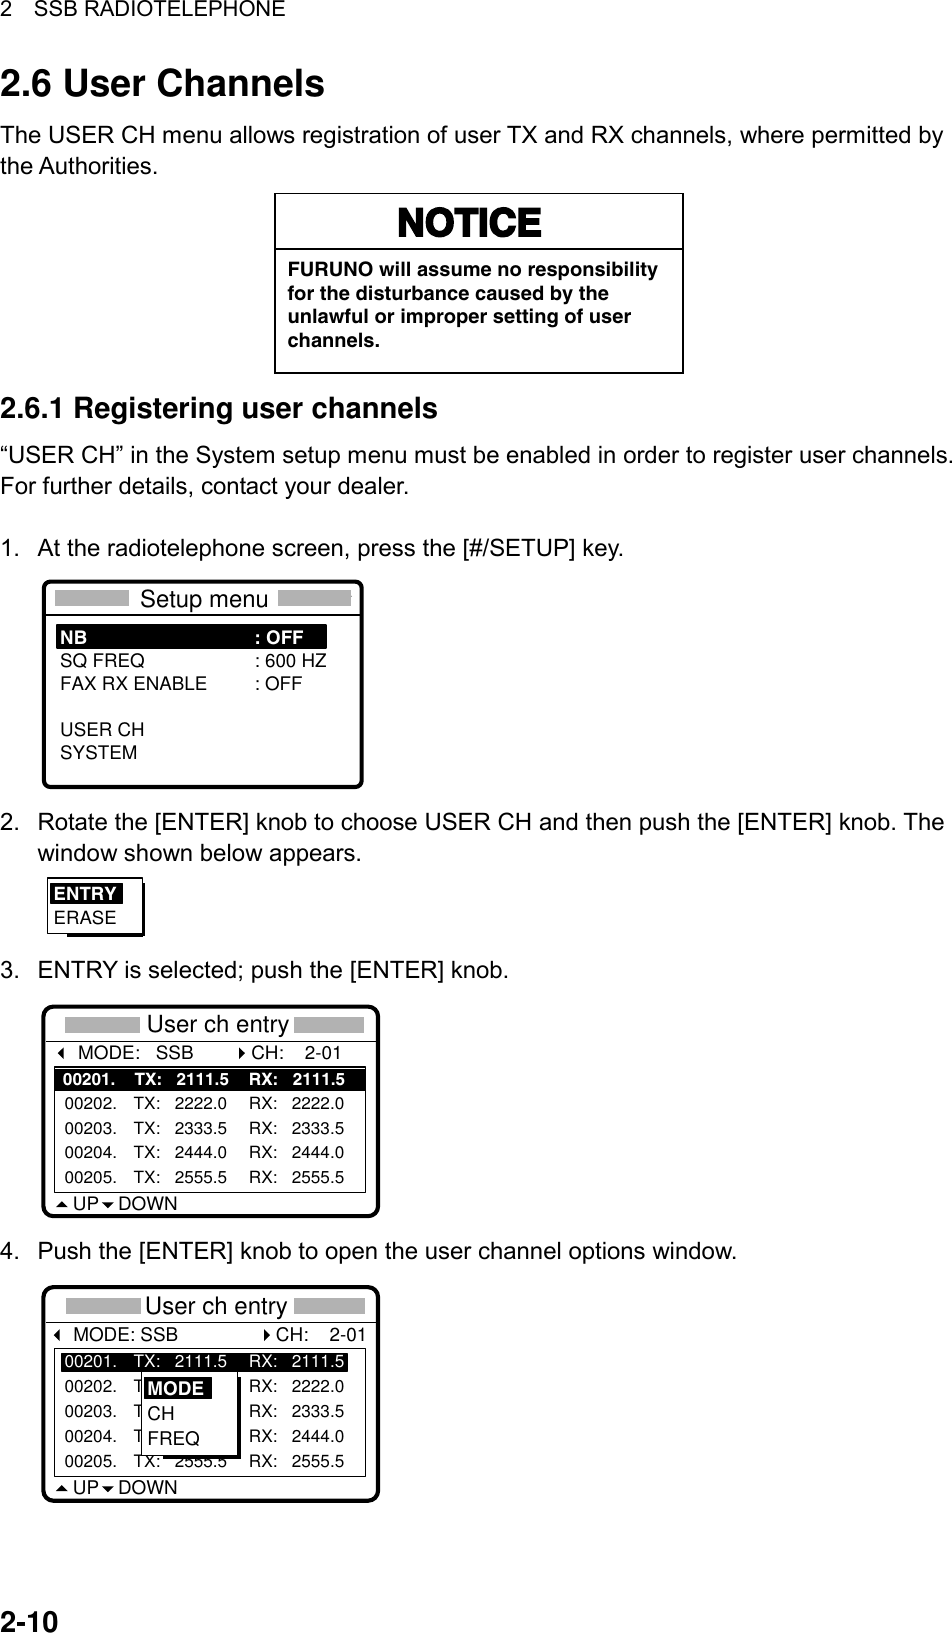 2  SSB RADIOTELEPHONE  2-102.6 User Channels The USER CH menu allows registration of user TX and RX channels, where permitted by the Authorities.   NOTICEFURUNO will assume no responsibilityfor the disturbance caused by theunlawful or improper setting of userchannels. 2.6.1 Registering user channels “USER CH” in the System setup menu must be enabled in order to register user channels. For further details, contact your dealer.  1.  At the radiotelephone screen, press the [#/SETUP] key.  ****    Setup menu    **** NB : OFFSQ FREQ : 600 HZFAX RX ENABLE : OFFUSER CHSYSTEM  2.  Rotate the [ENTER] knob to choose USER CH and then push the [ENTER] knob. The window shown below appears. ENTRYERASE 3.  ENTRY is selected; push the [ENTER] knob. *** User ch entry ** MODE:   SSBUP DOWN00201.    TX:   2111.5 RX:   2111.500202. TX:   2222.0 RX:   2222.000203. TX:   2333.5 RX:   2333.500204. TX:   2444.0 RX:   2444.000205. TX:   2555.5 RX:   2555.5CH:    2-01 4.  Push the [ENTER] knob to open the user channel options window. *** User ch entry ** MODE: SSB                CH:    2-01UP DOWN00201. TX:   2111.5 RX:   2111.500202. TX:   2222.0 RX:   2222.000203. TX:   2333.5 RX:   2333.500204. TX:   2444.0 RX:   2444.000205. TX:   2555.5 RX:   2555.5MODECHFREQ 